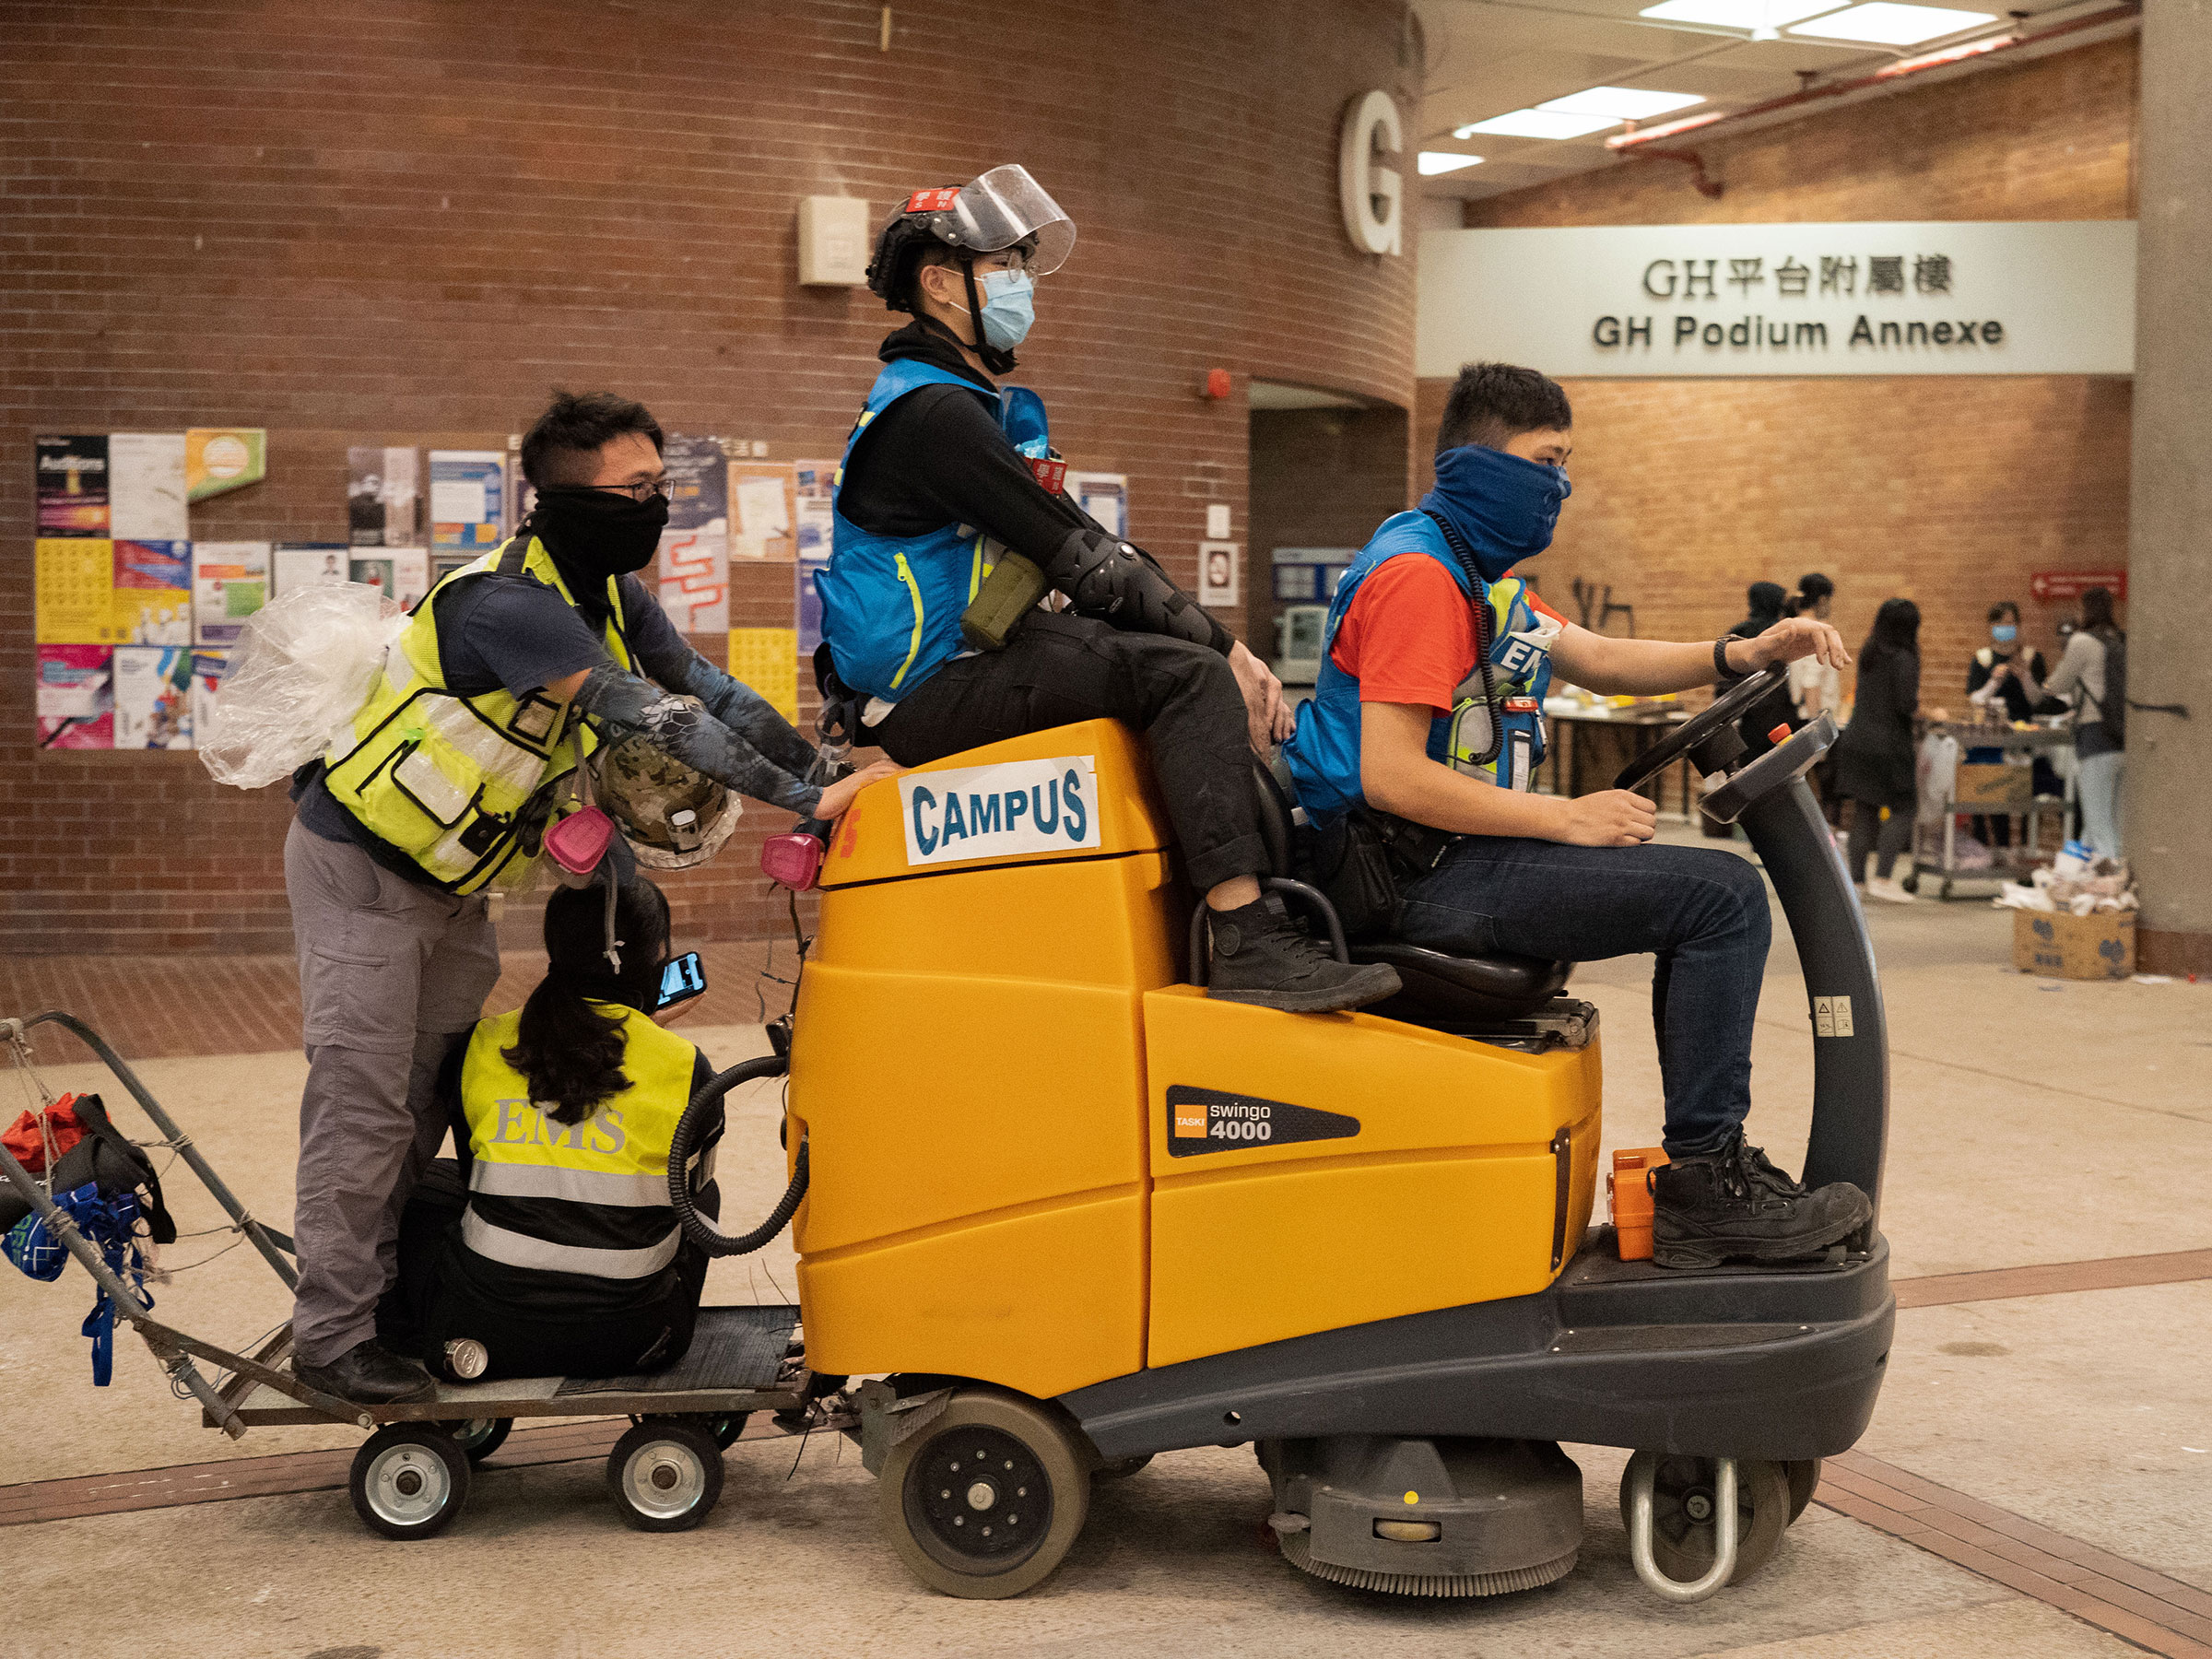 First-aiders convert a floor cleaning machine into a makeshift ambulance, Nov. 14. (Bing Guan)